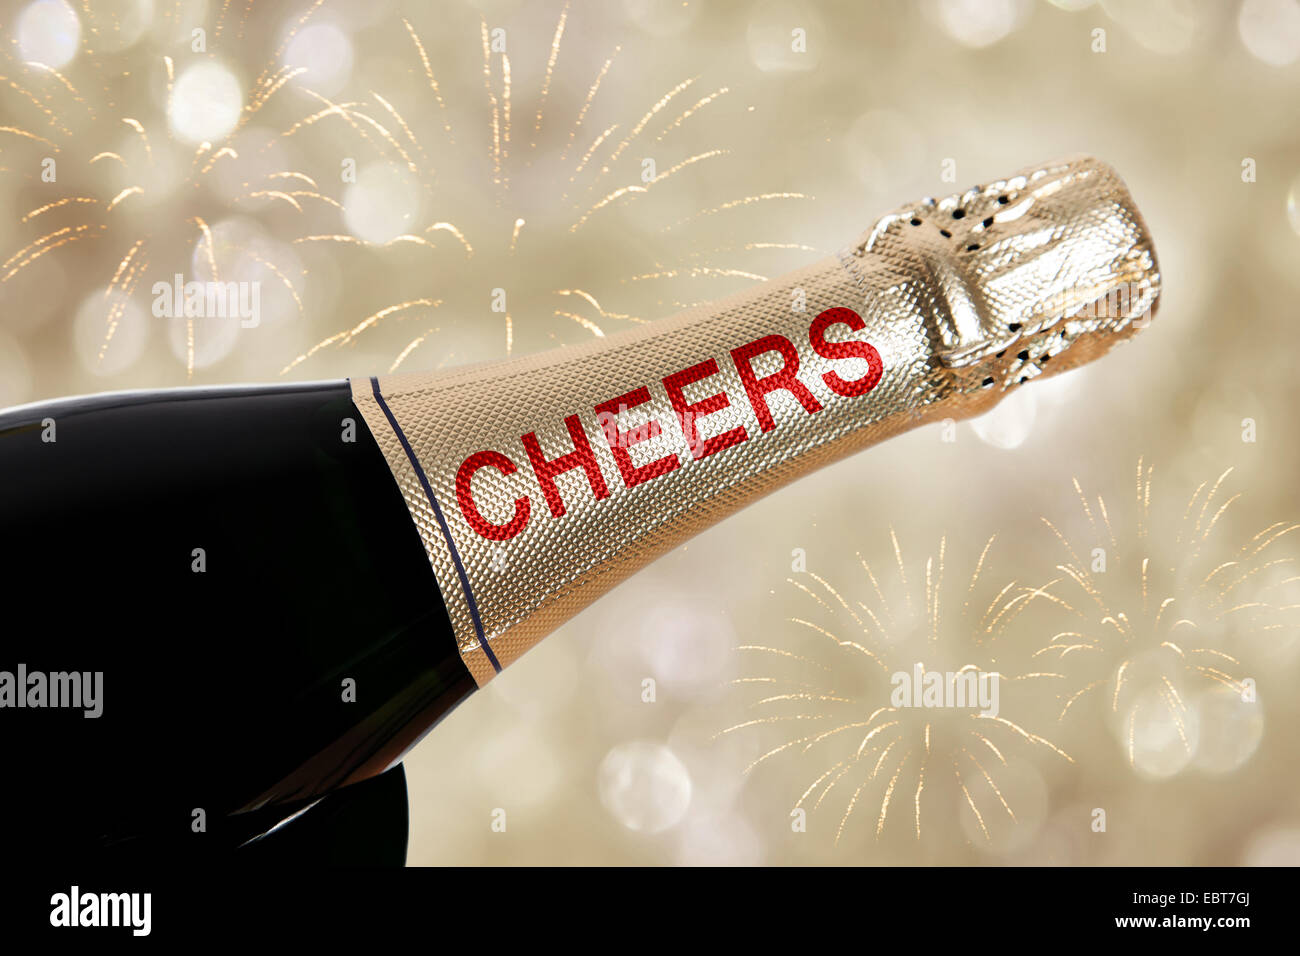 Cheers written on champagne bottle on new year Stock Photo